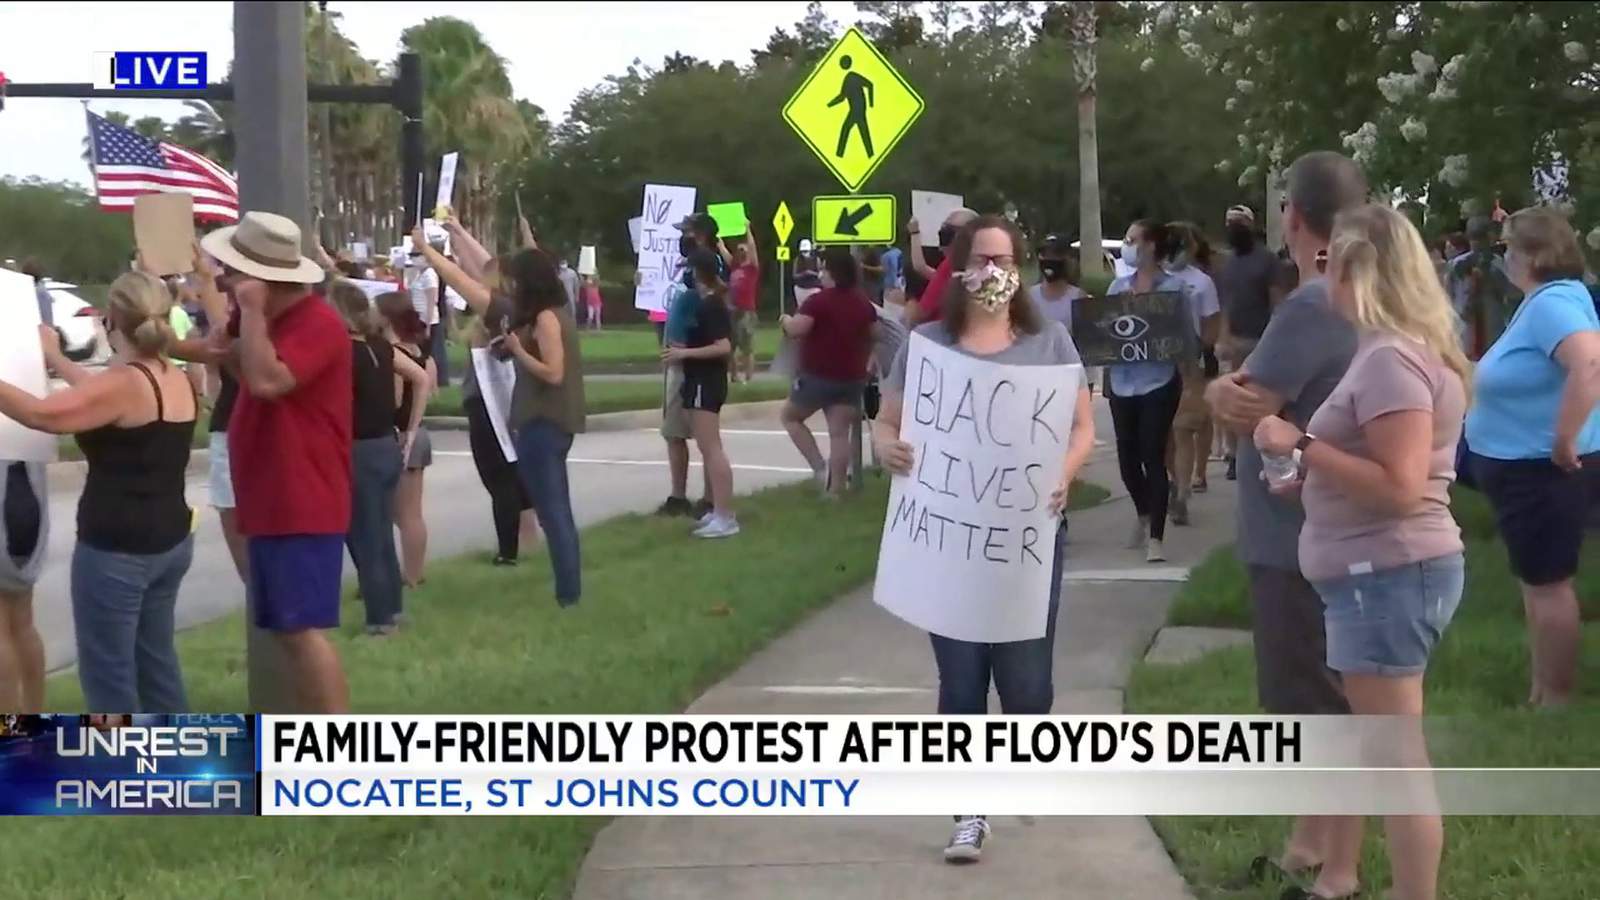 Protesters gather in Nocatee regarding the death of George Floyd